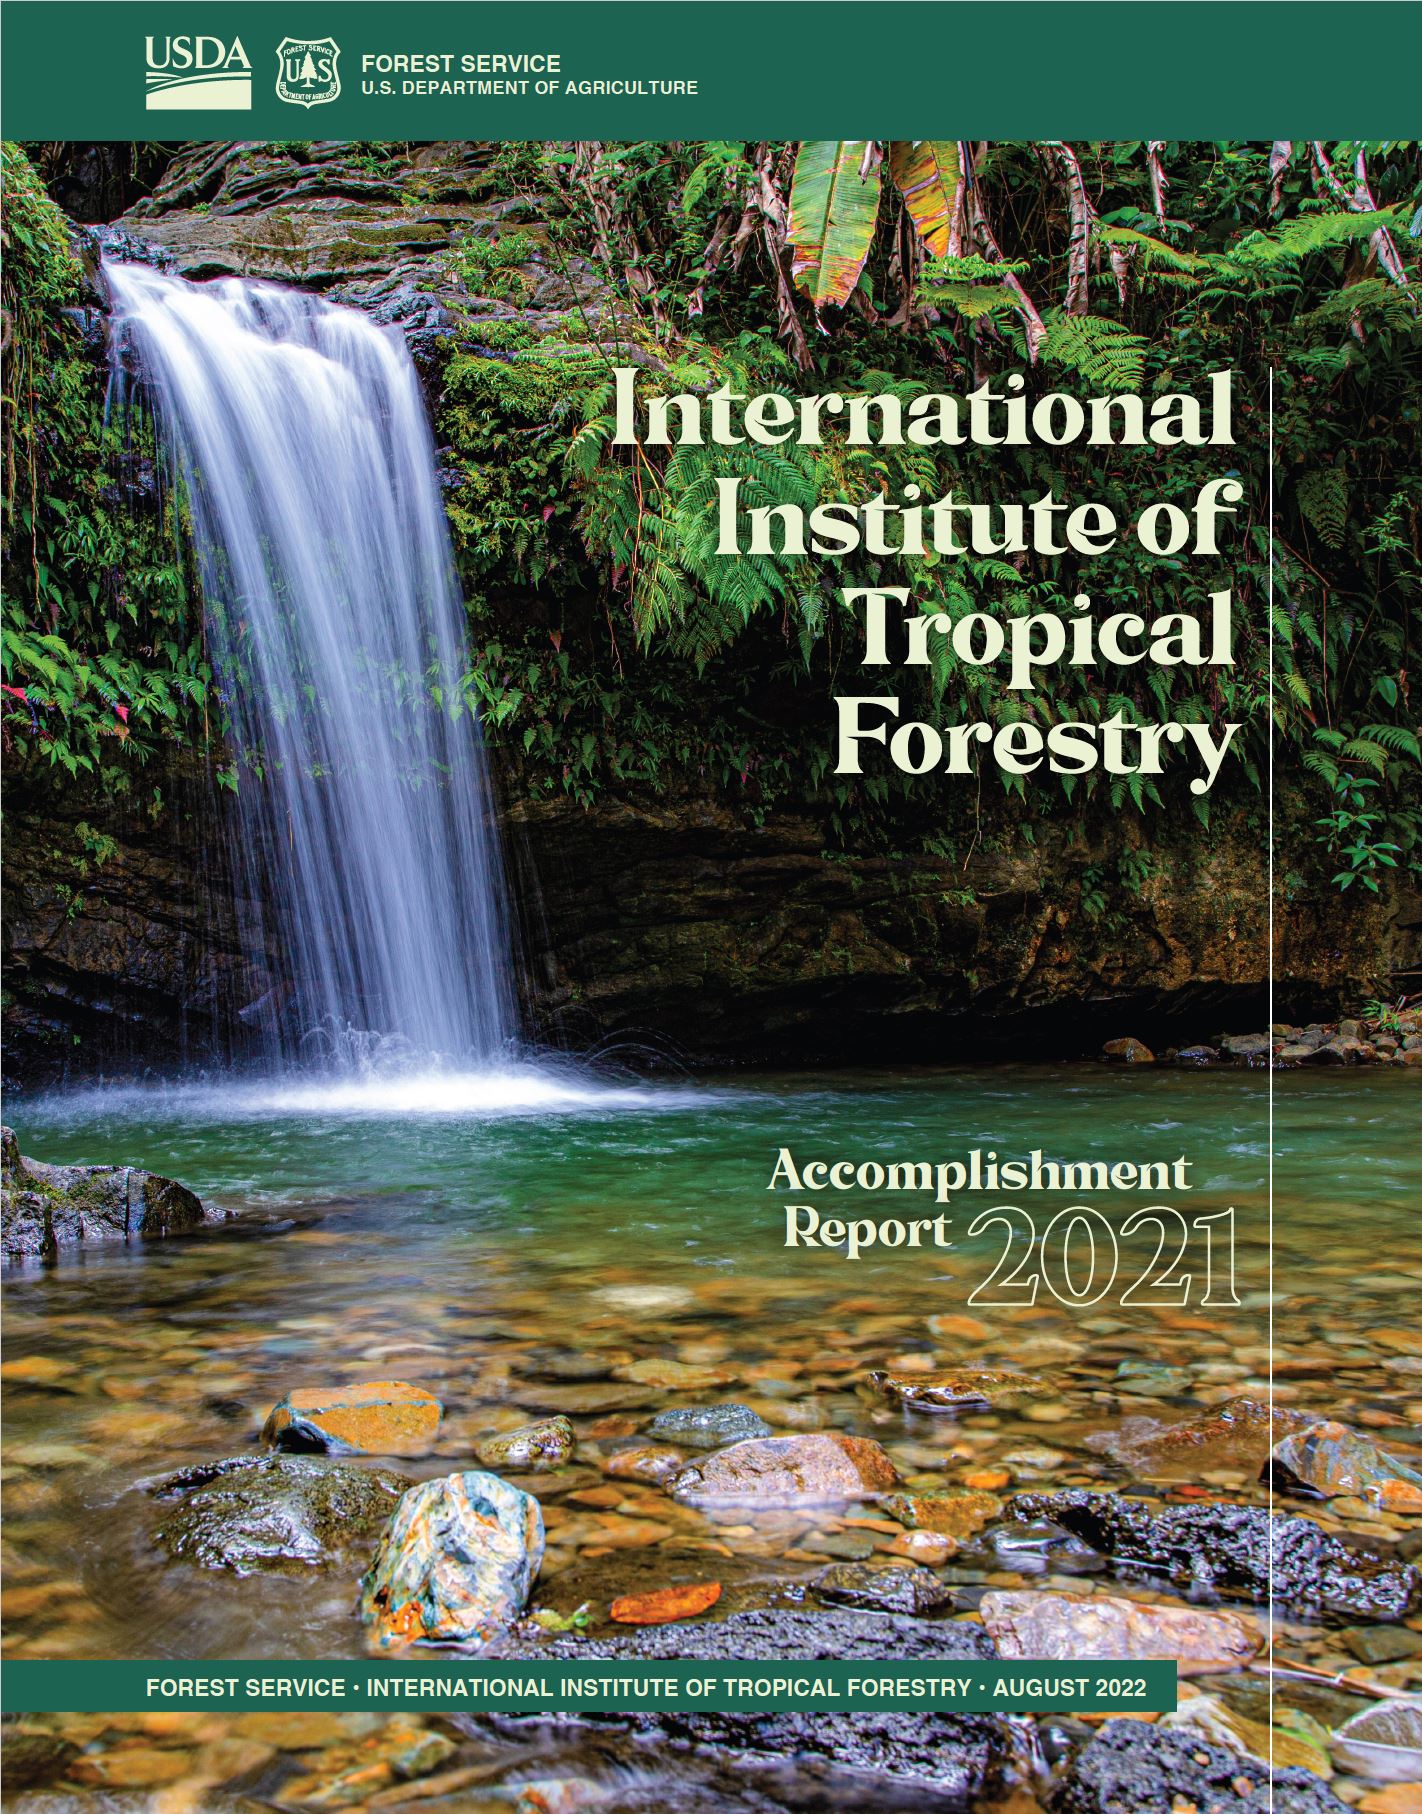 A waterfall in the background and the logo and information of IITF make the cover of the AR 2021